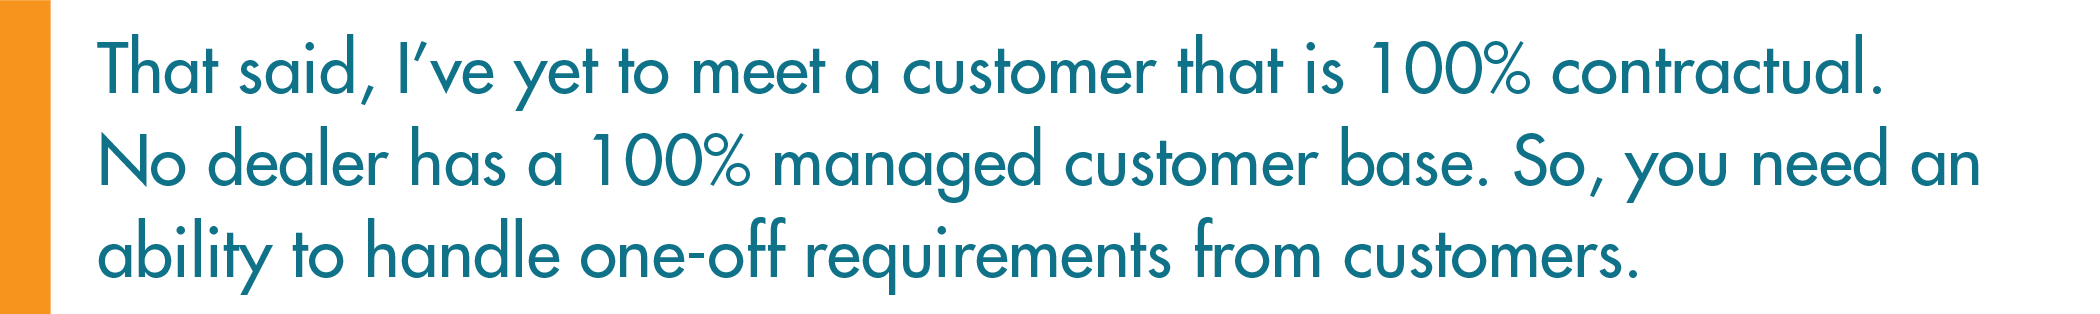 No dealer has a 100% managed customer base. So, you need an ability to handle one-off requirements from customers.